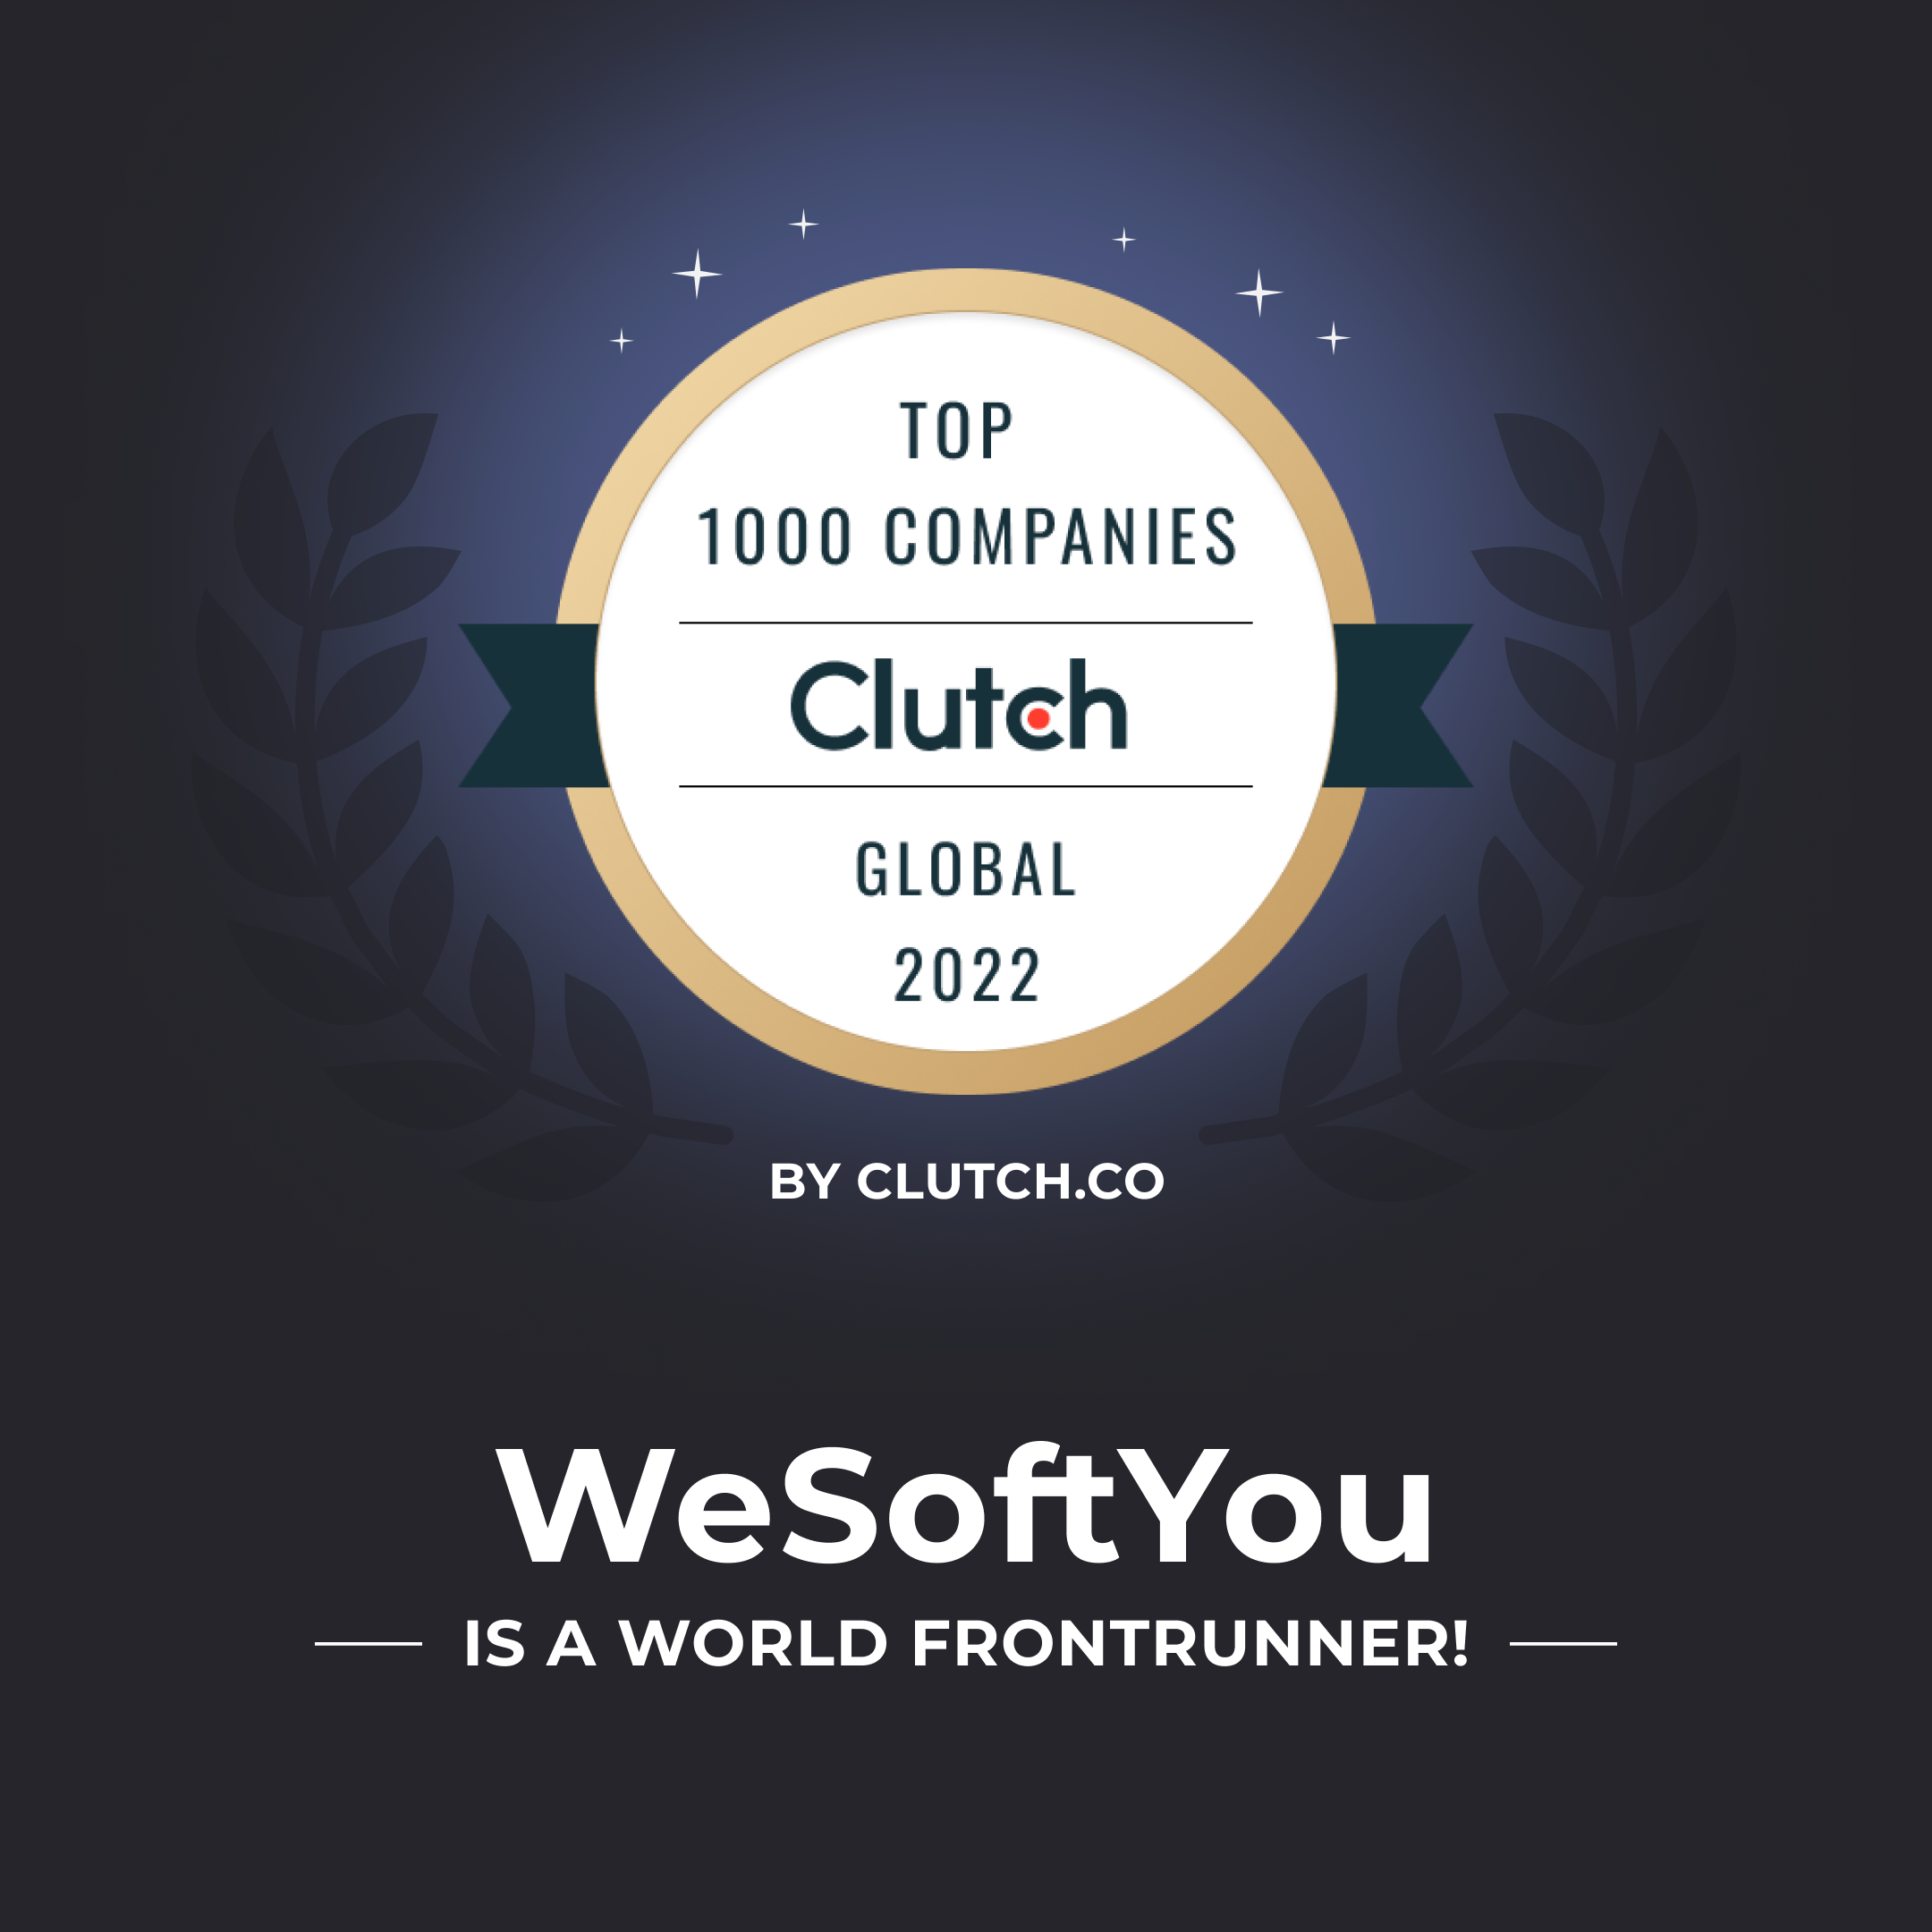 WSU is a world Frontrunner – Top 1% in the world by Clutch, image #7